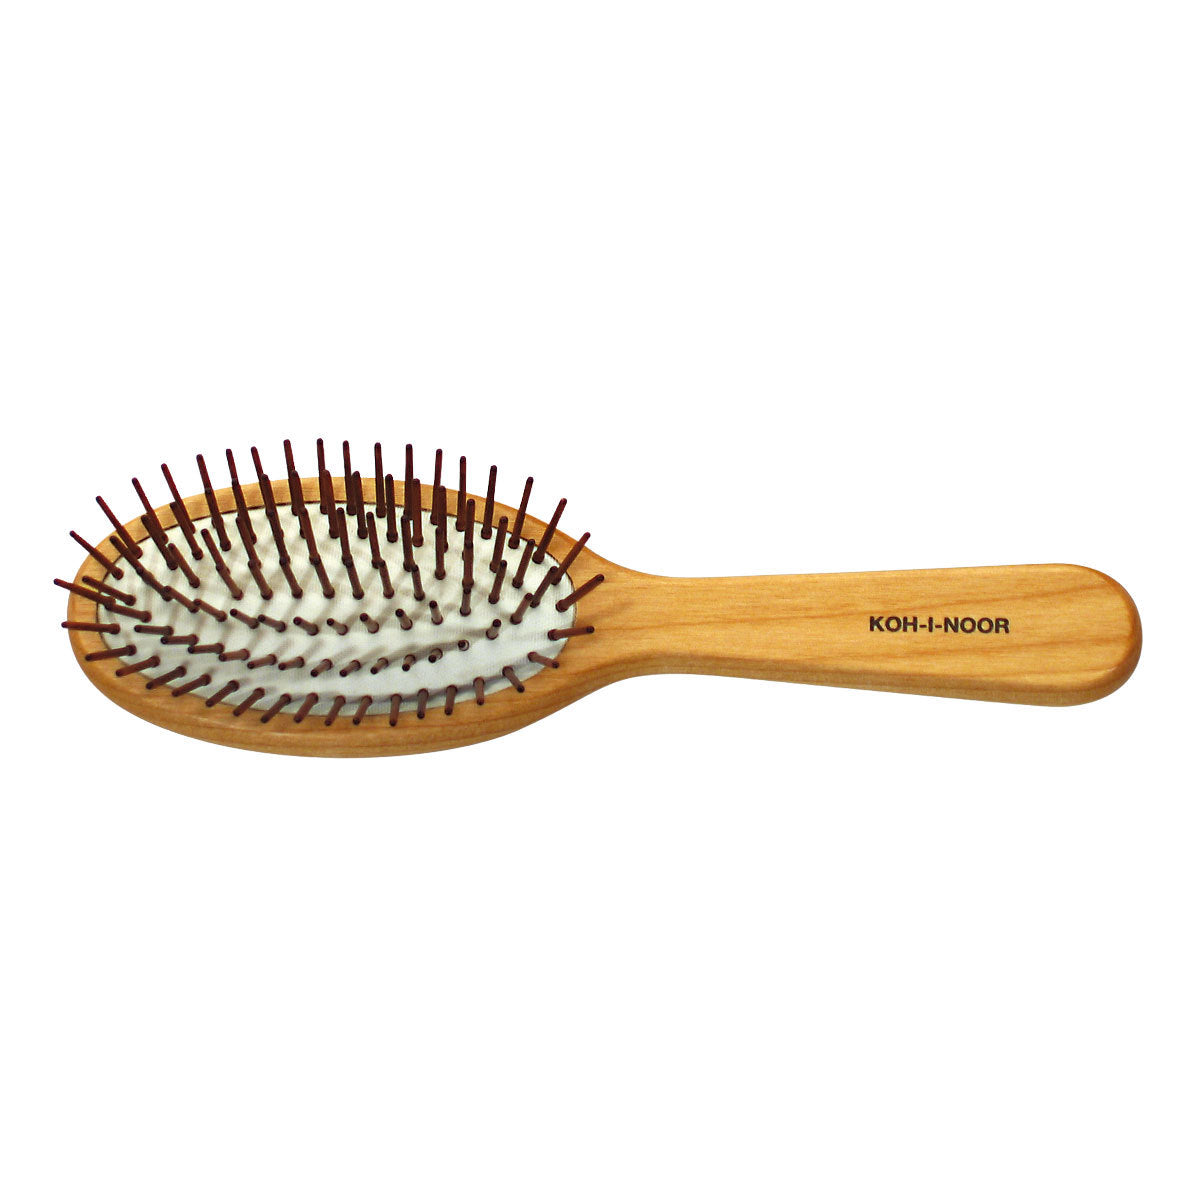 Primary image of Wooden Pneumatic Oval Hairbrush